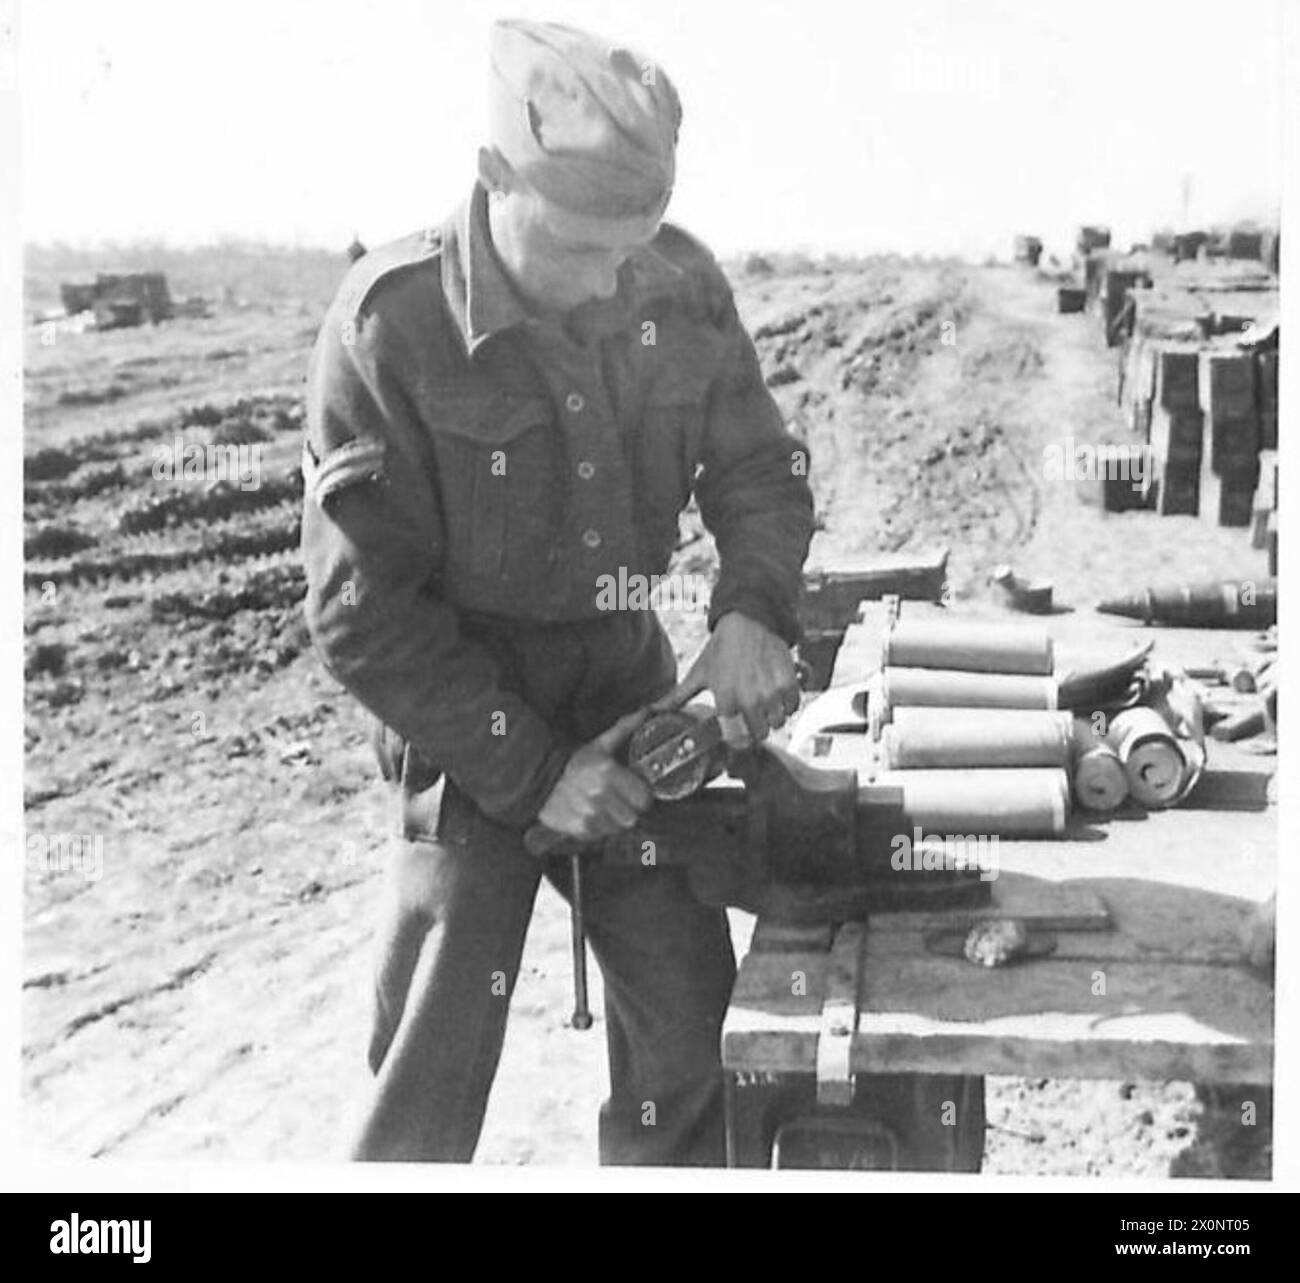 EIGHTH ARMY : PSYCHOLOGICAL WARFARE - Cpl. Sparks of Darlington screws up a base plate for checking the loading of the leaflets. Photographic negative , British Army Stock Photo